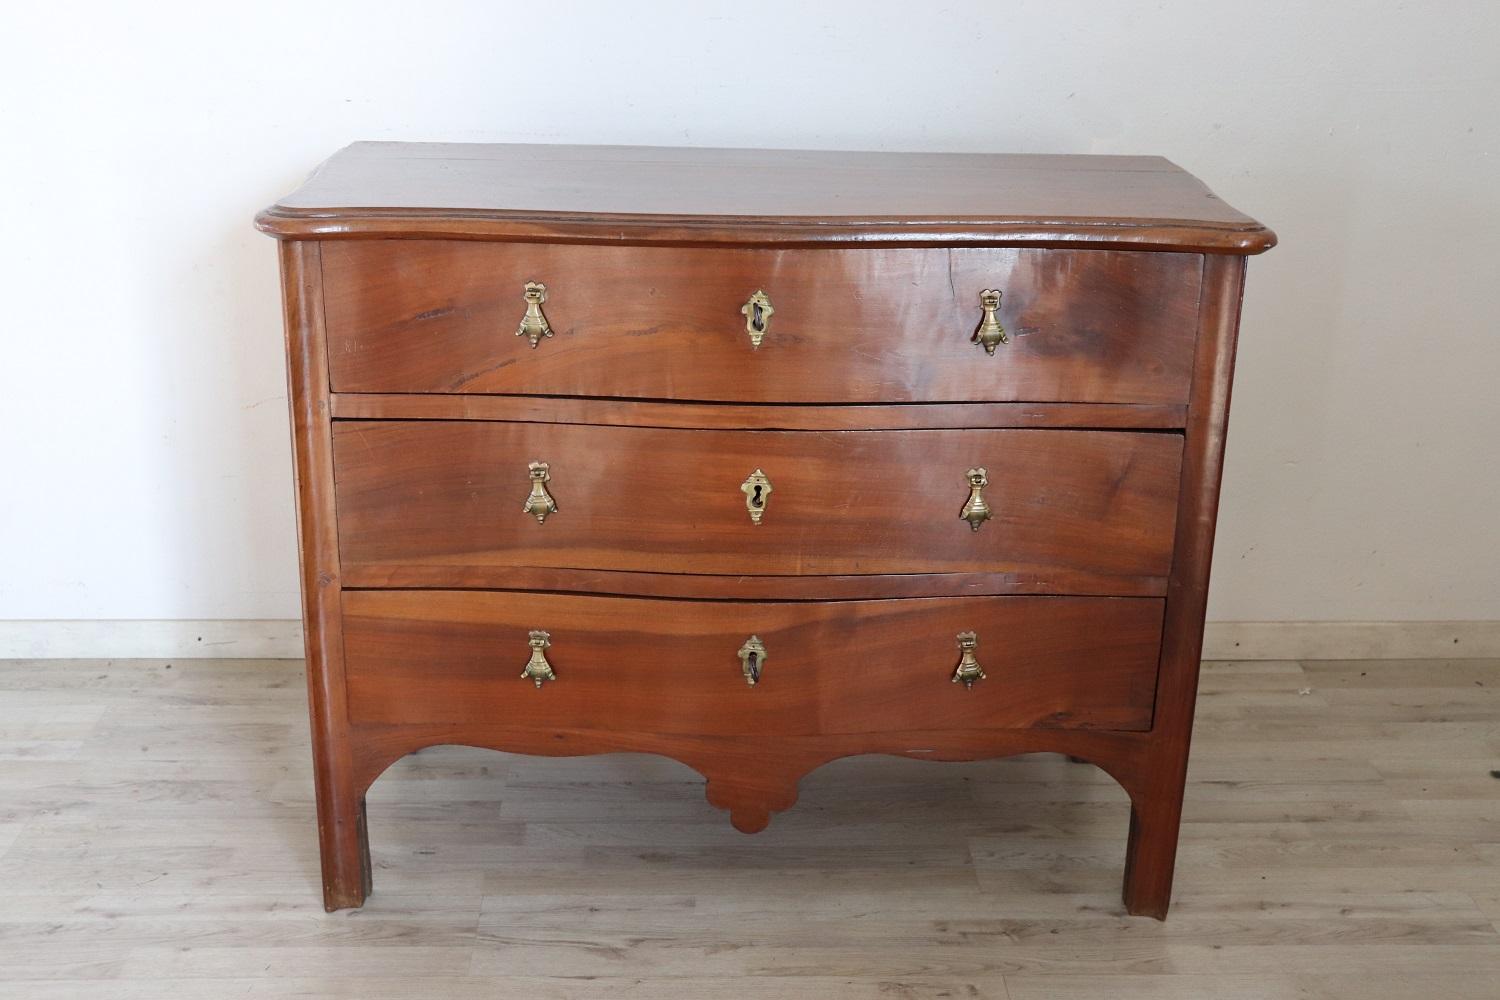 Important and rare antique Italian of the period Louis XV chest of drawers, 1750. On the front three large and useful drawers. Characterized by front of the drawers with relief decorations hand carved in solid walnut wood. High quality cabinetry